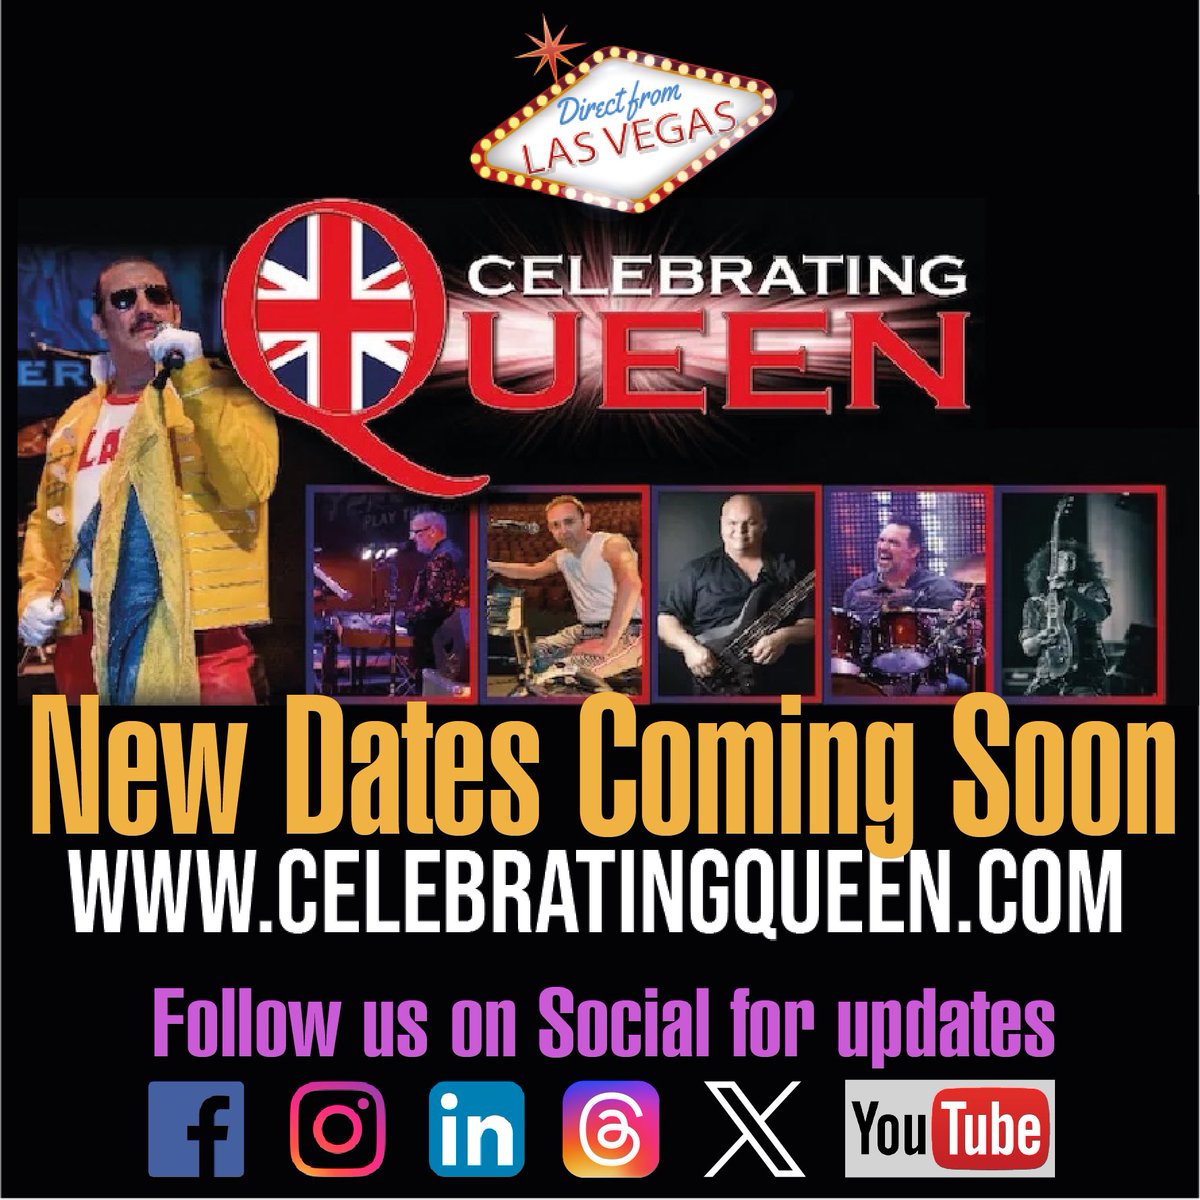 New Dates coming Soon

Follow our social channels for updates

Visit celebratingqueen.com for details and links to all our social media channels.